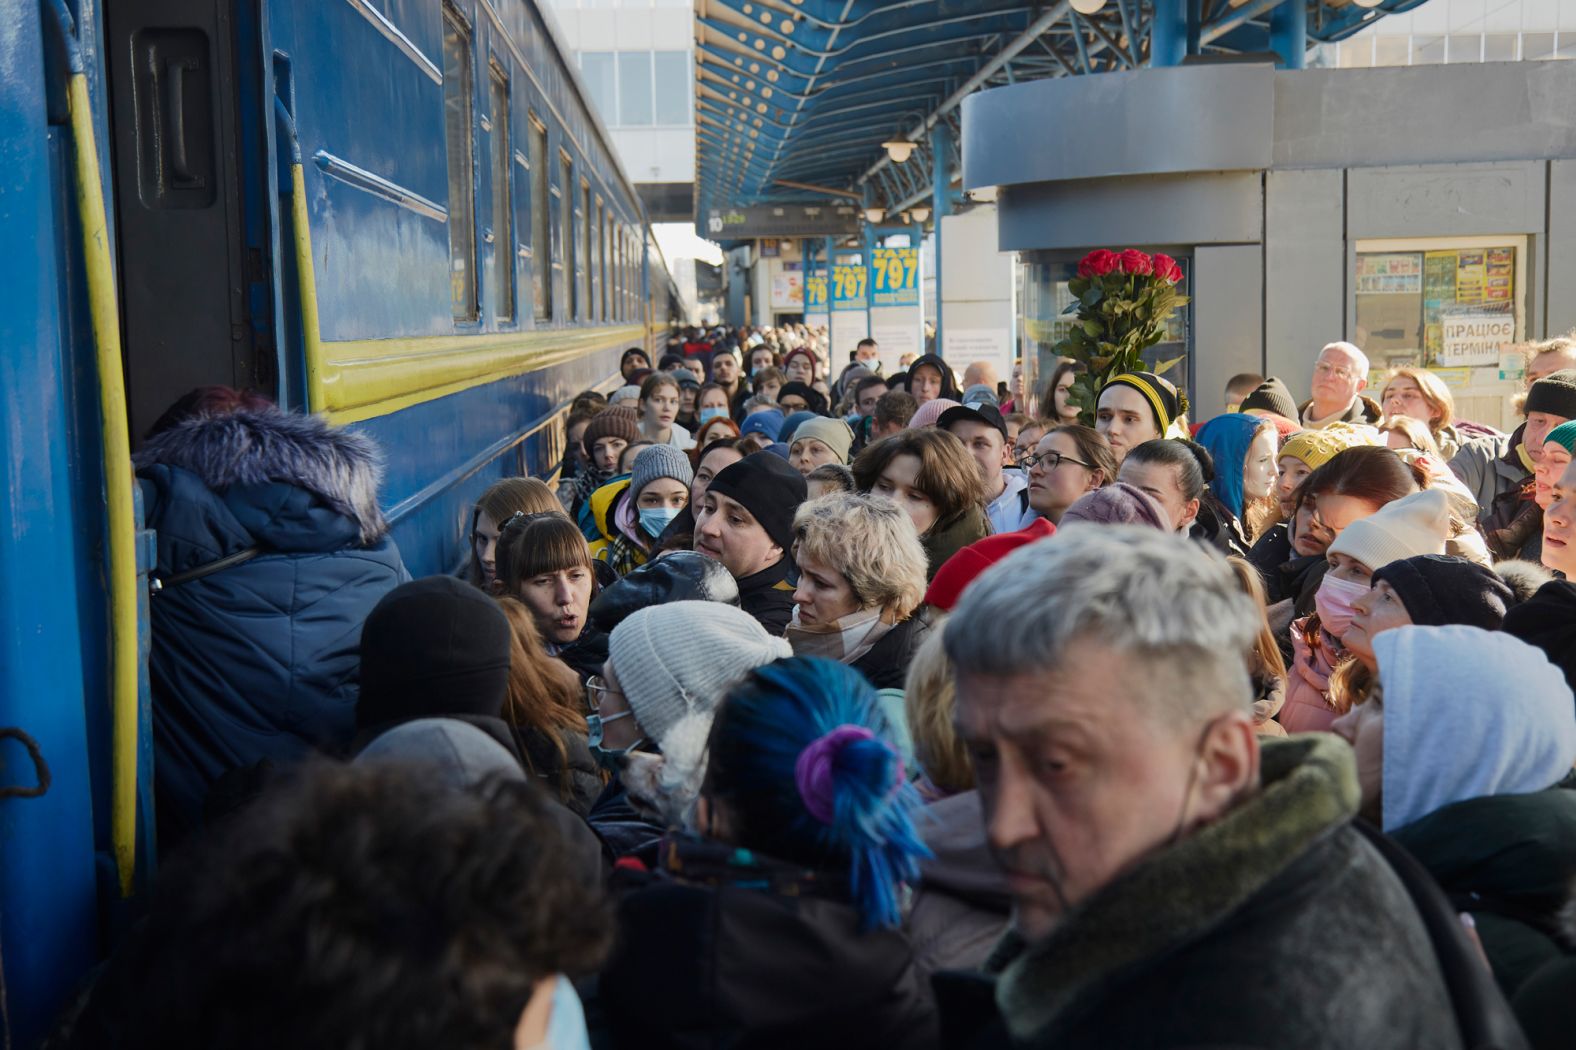 People in Kyiv board a train heading to the west of the country on February 26. Kelly Clements, the United Nations Deputy High Commissioner for Refugees, <a href="index.php?page=&url=https%3A%2F%2Fwww.cnn.com%2Feurope%2Flive-news%2Fukraine-russia-news-02-26-22%2Fh_efaa0d529edb3c122cc17b3968d6d211" target="_blank">told CNN</a> that more than 120,000 people had left Ukraine while 850,000 were internally displaced.